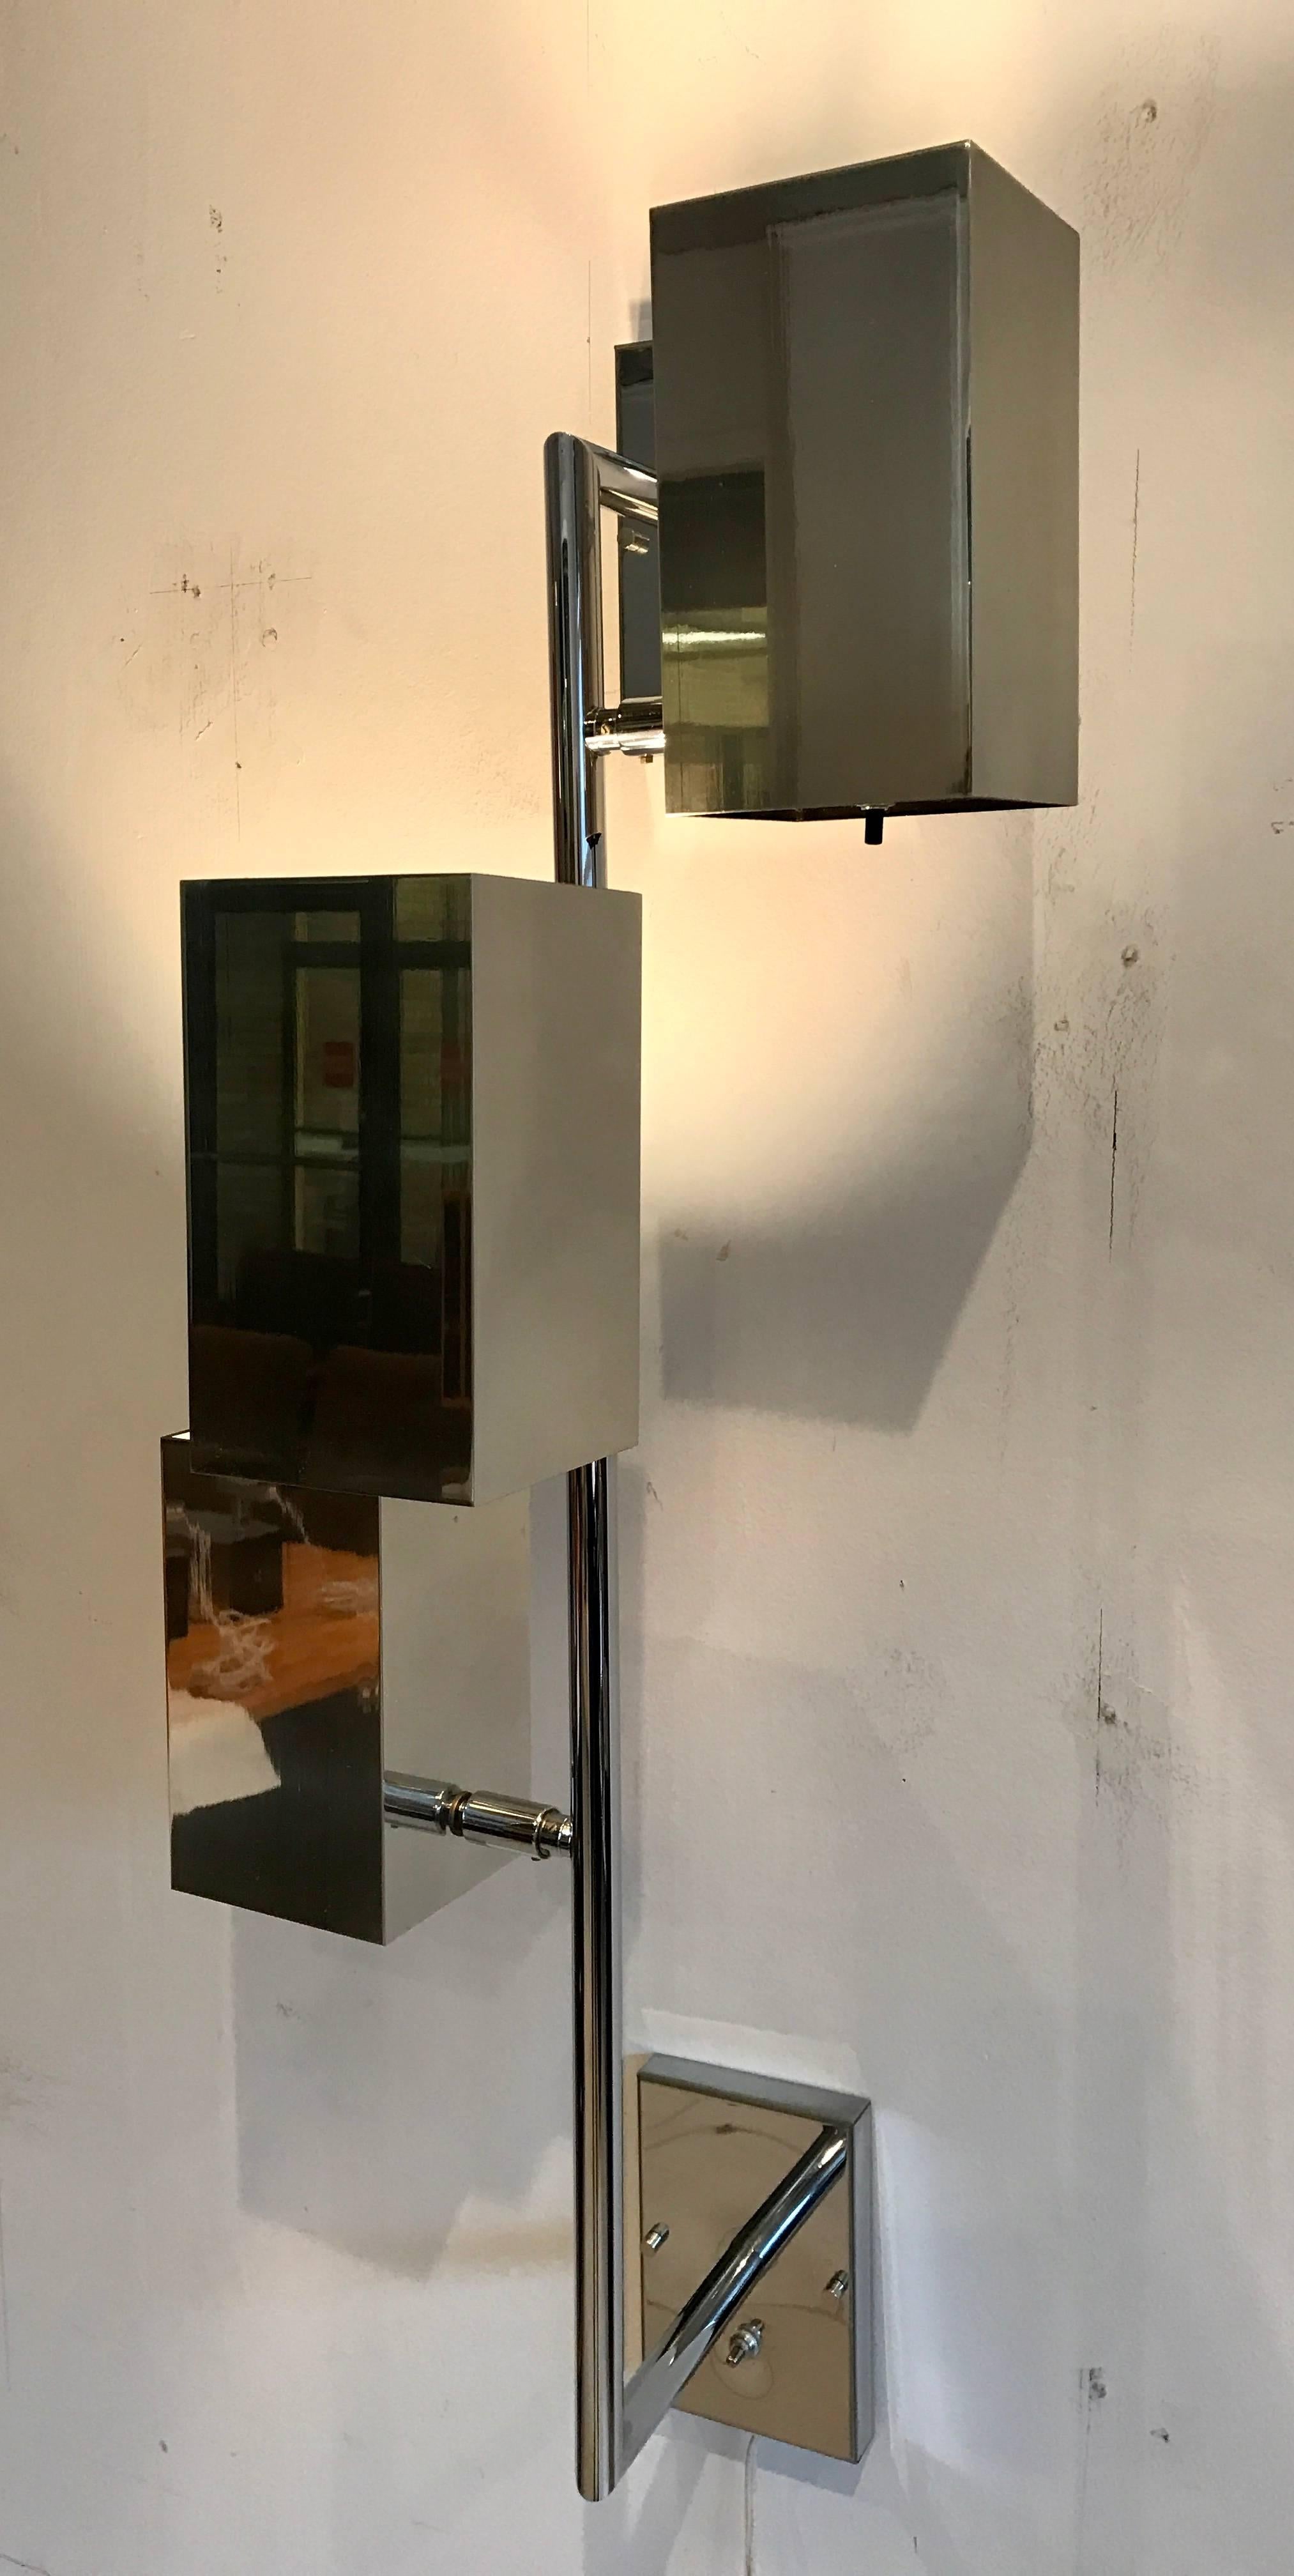 Awesome polished chrome three box shaped wall light by Koch & Lowy Lamp Co. The three lights are fixed onto a chrome pole which is affixed to the wall with two back plates measuring 4 inch wide by 6 inch high by 3/4 inch deep. Great design!